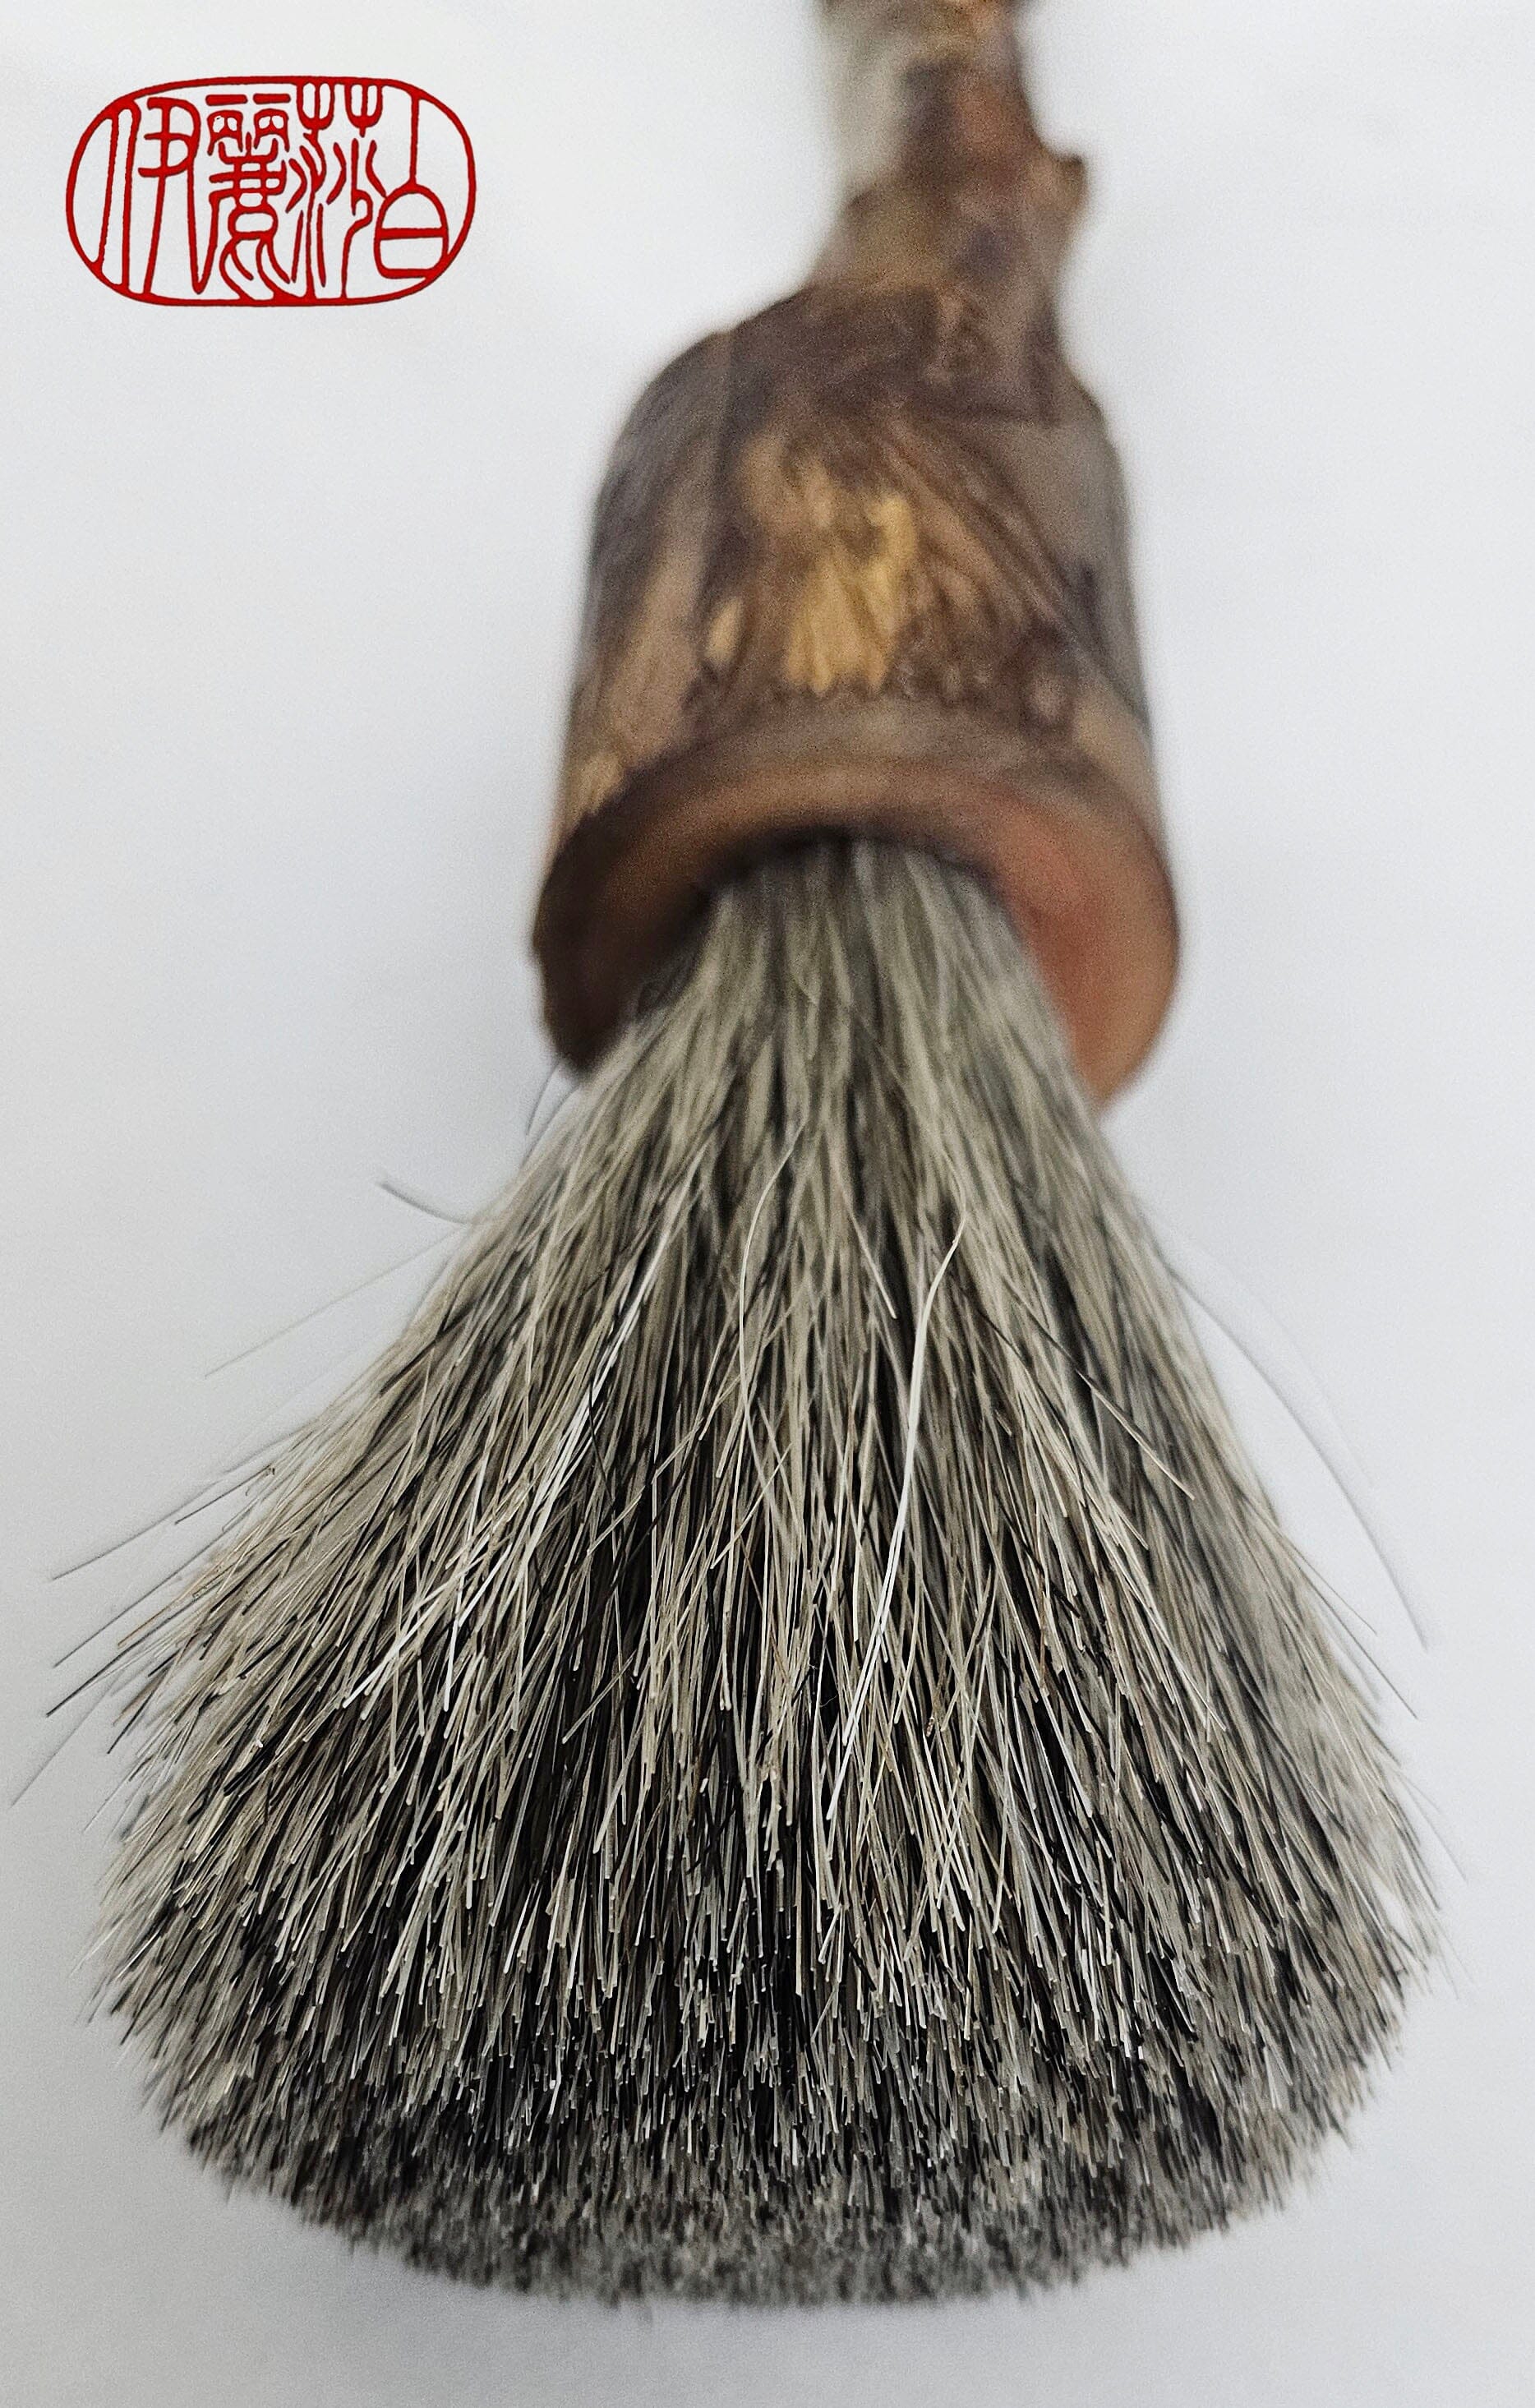 Handcrafted Sumi-e Style Painter's Brush with Driftwood Handle and Horsehair Bristles Sumi-e Paintbrush Elizabeth Schowachert Art